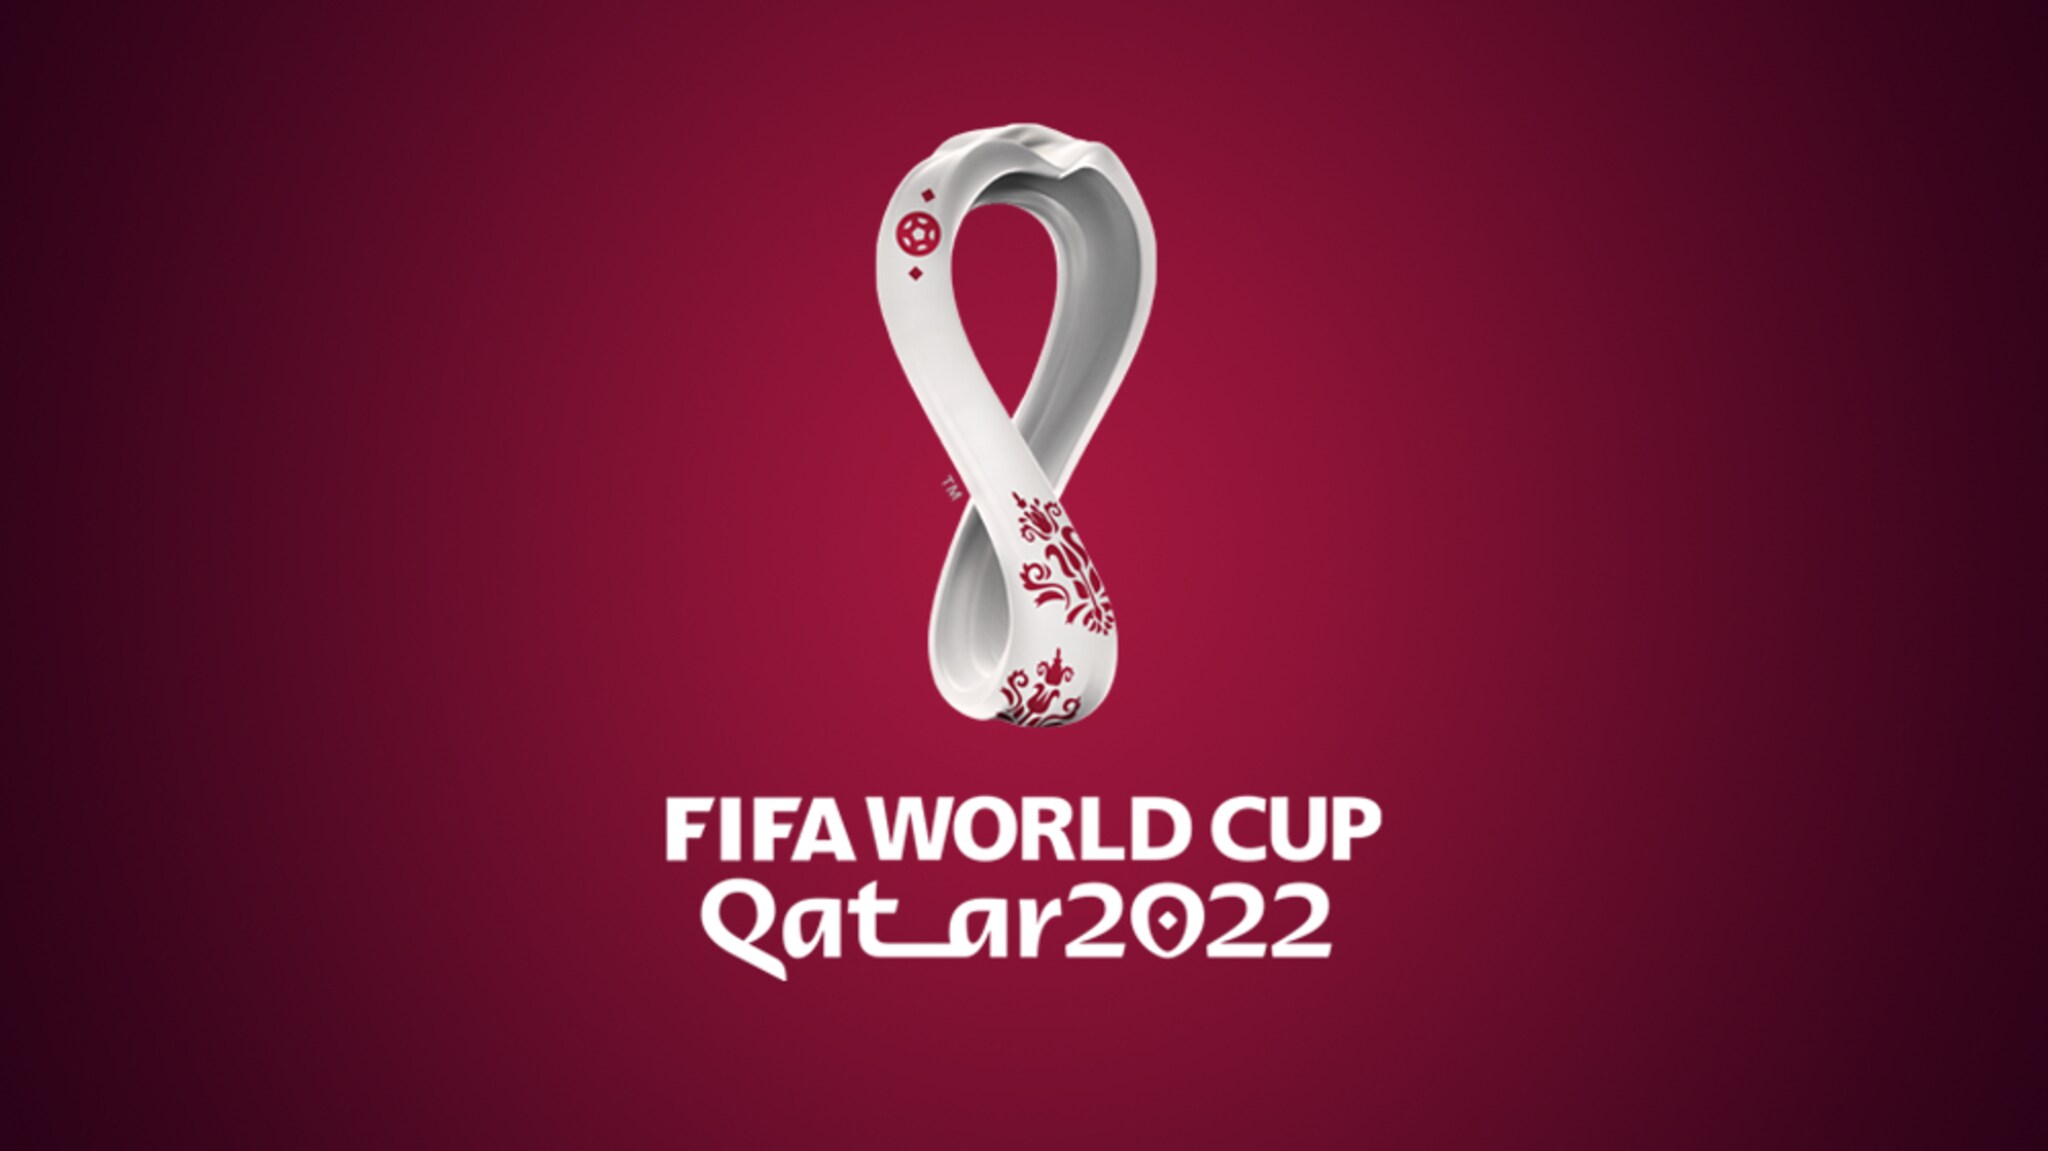 The most beautiful posters in the World Cup group stage after the draw in Qatar